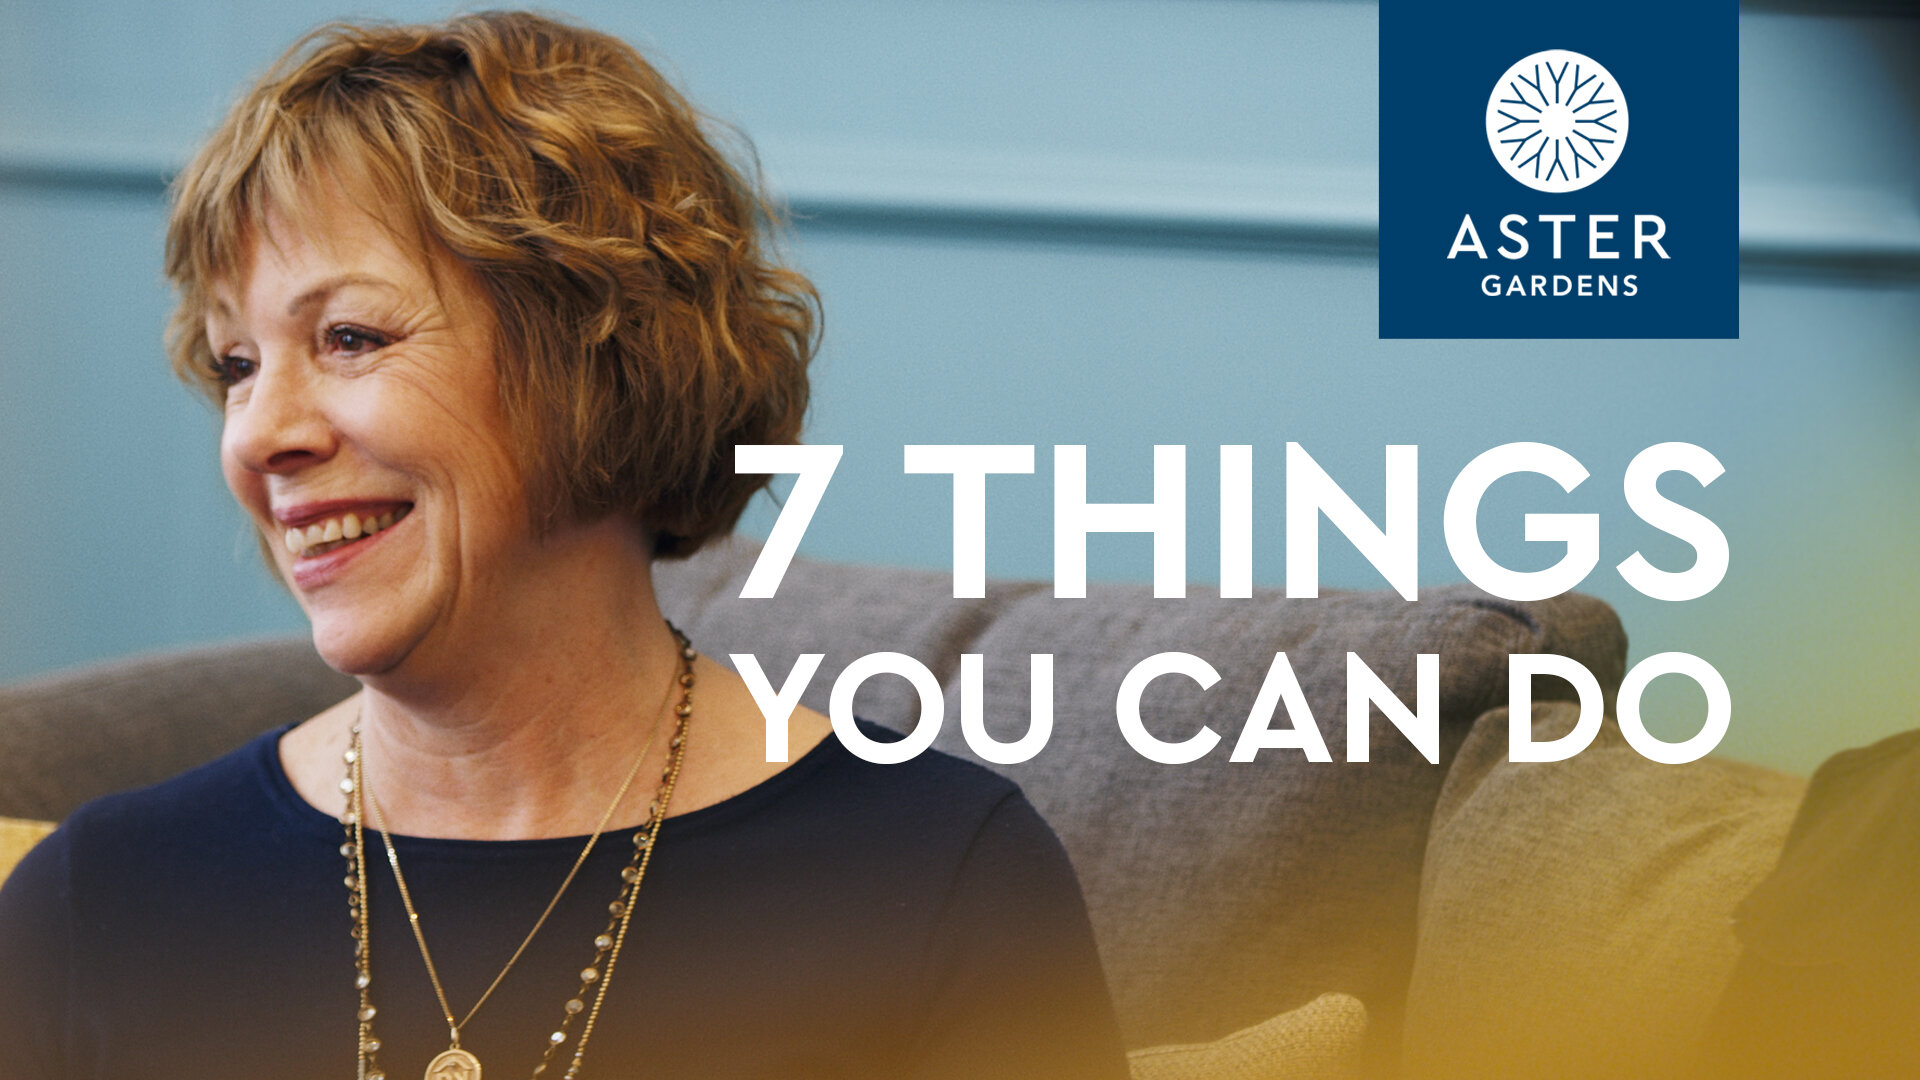 An elderly lady with text - 7 Things You Can Do at Aster Gardens